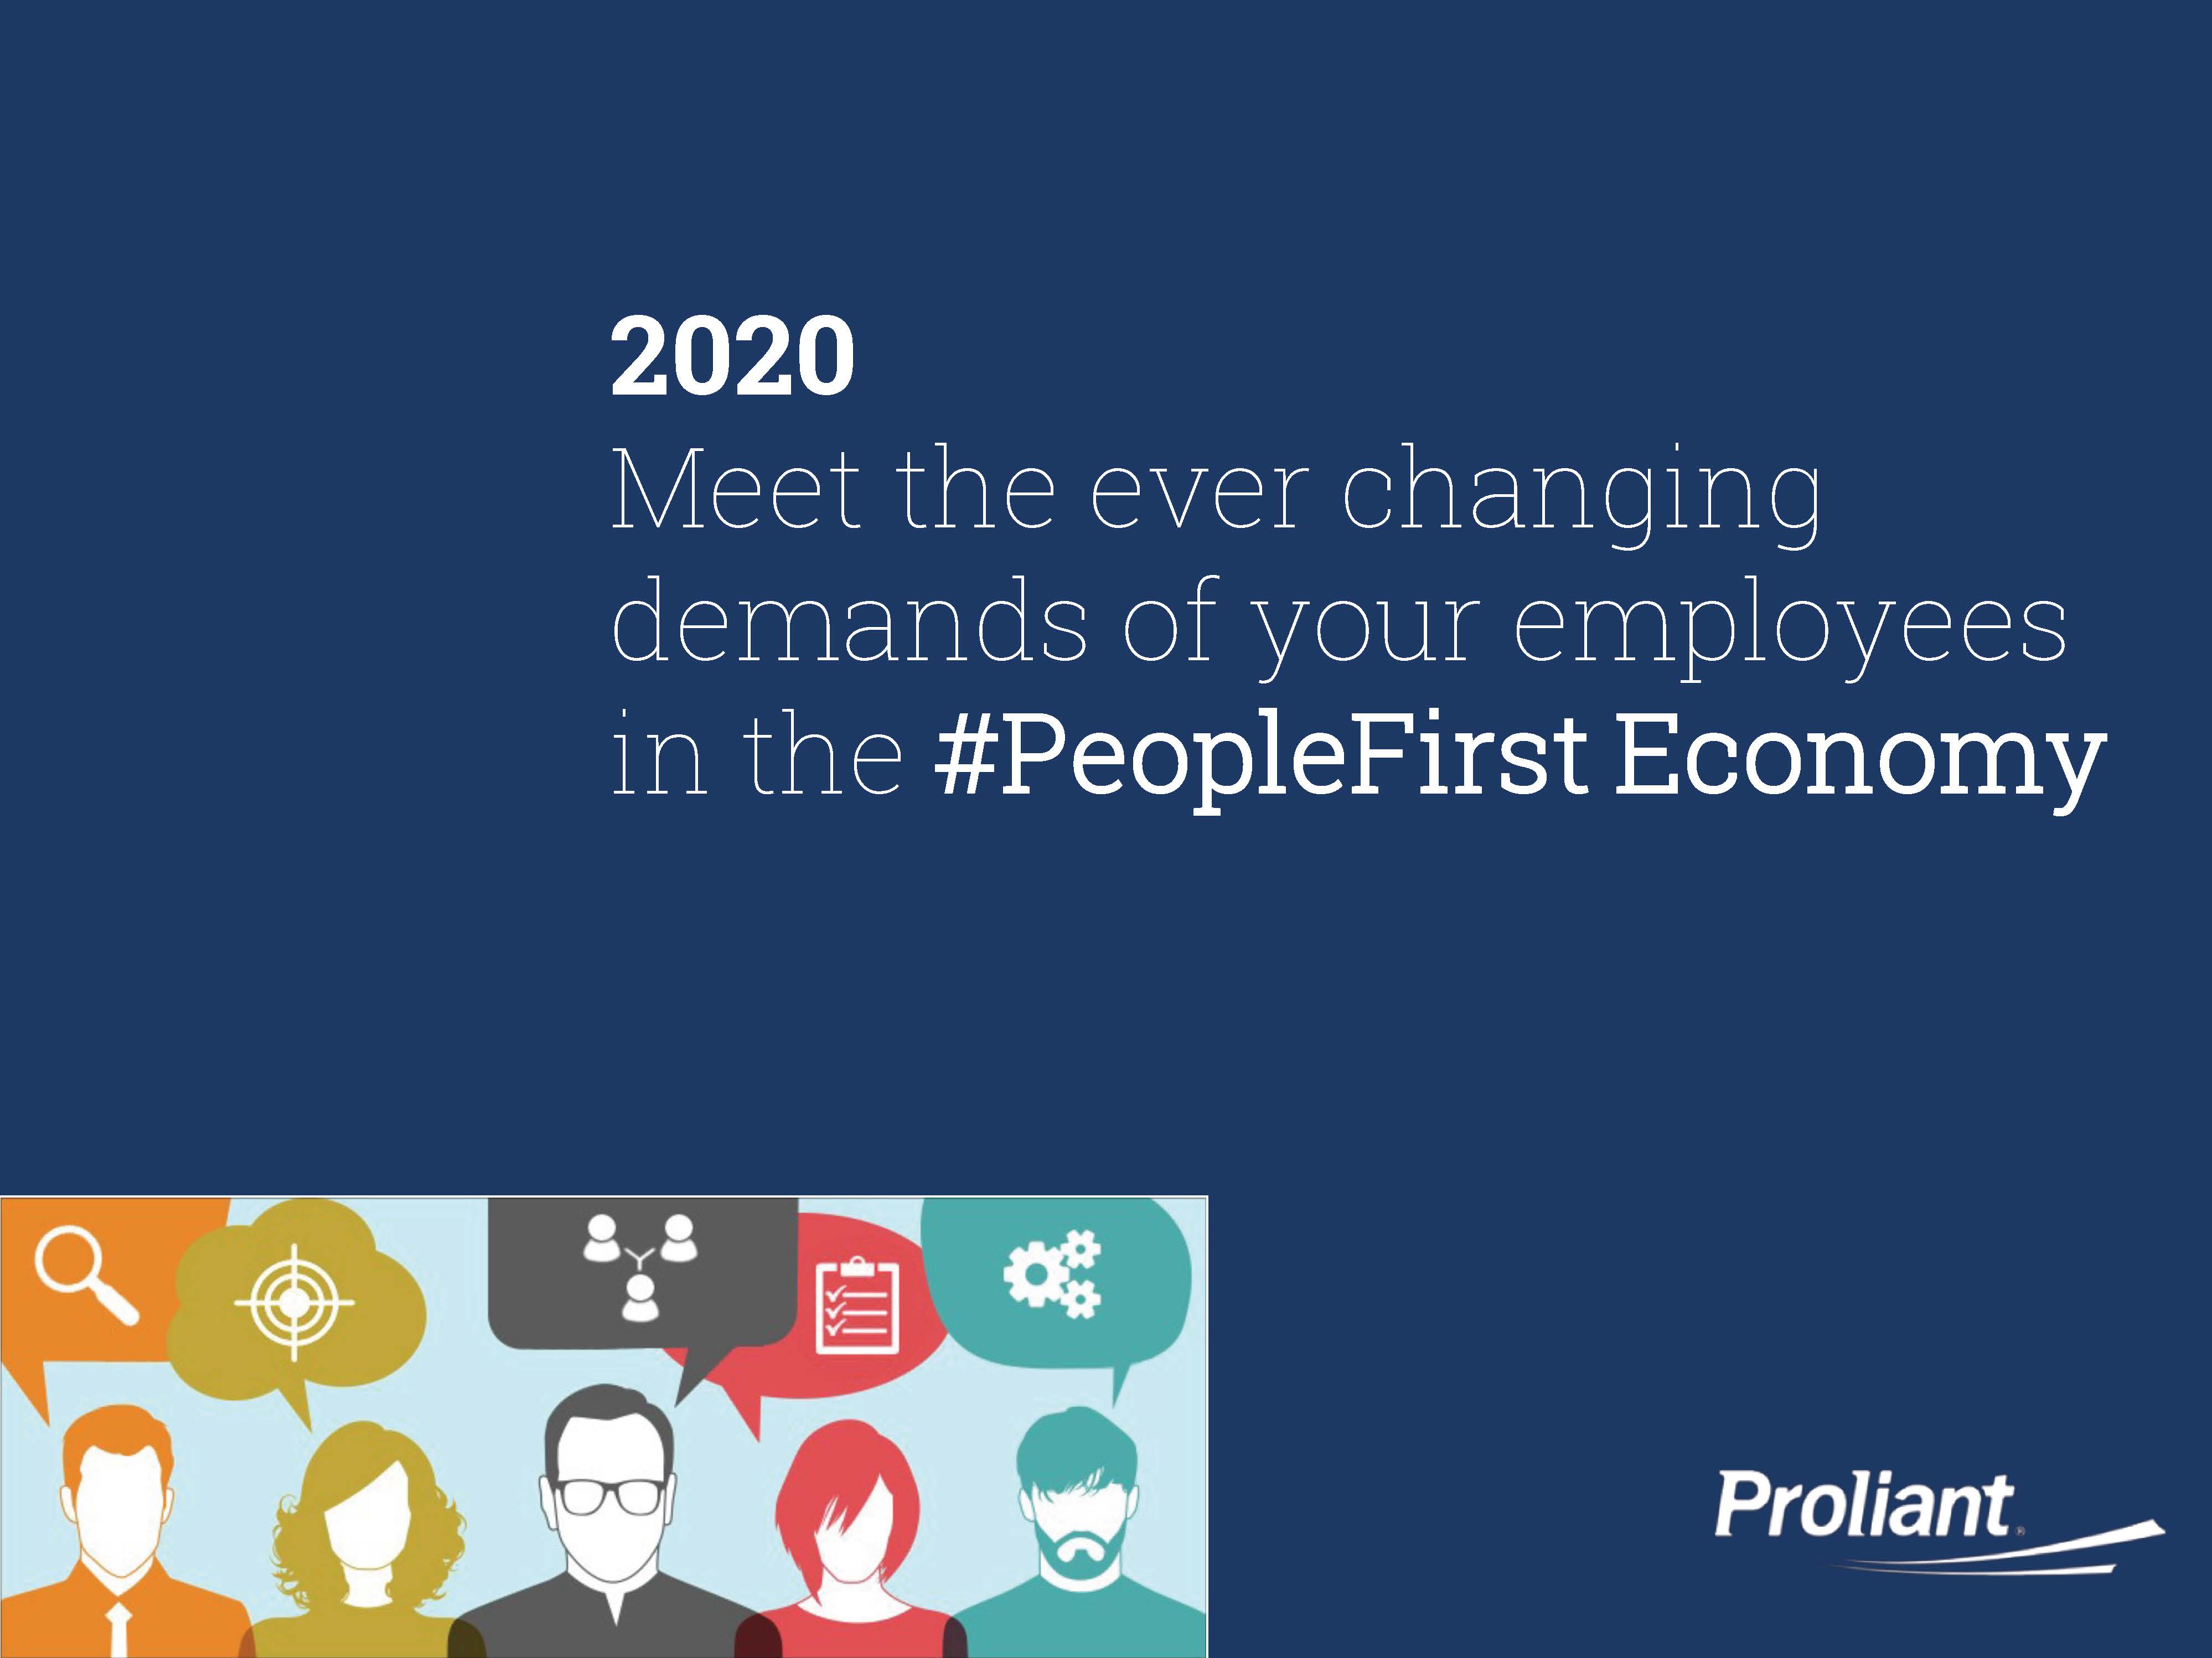 Meet the ever changing demands of your employees in the PeopleFirst Economy - Proliant-1